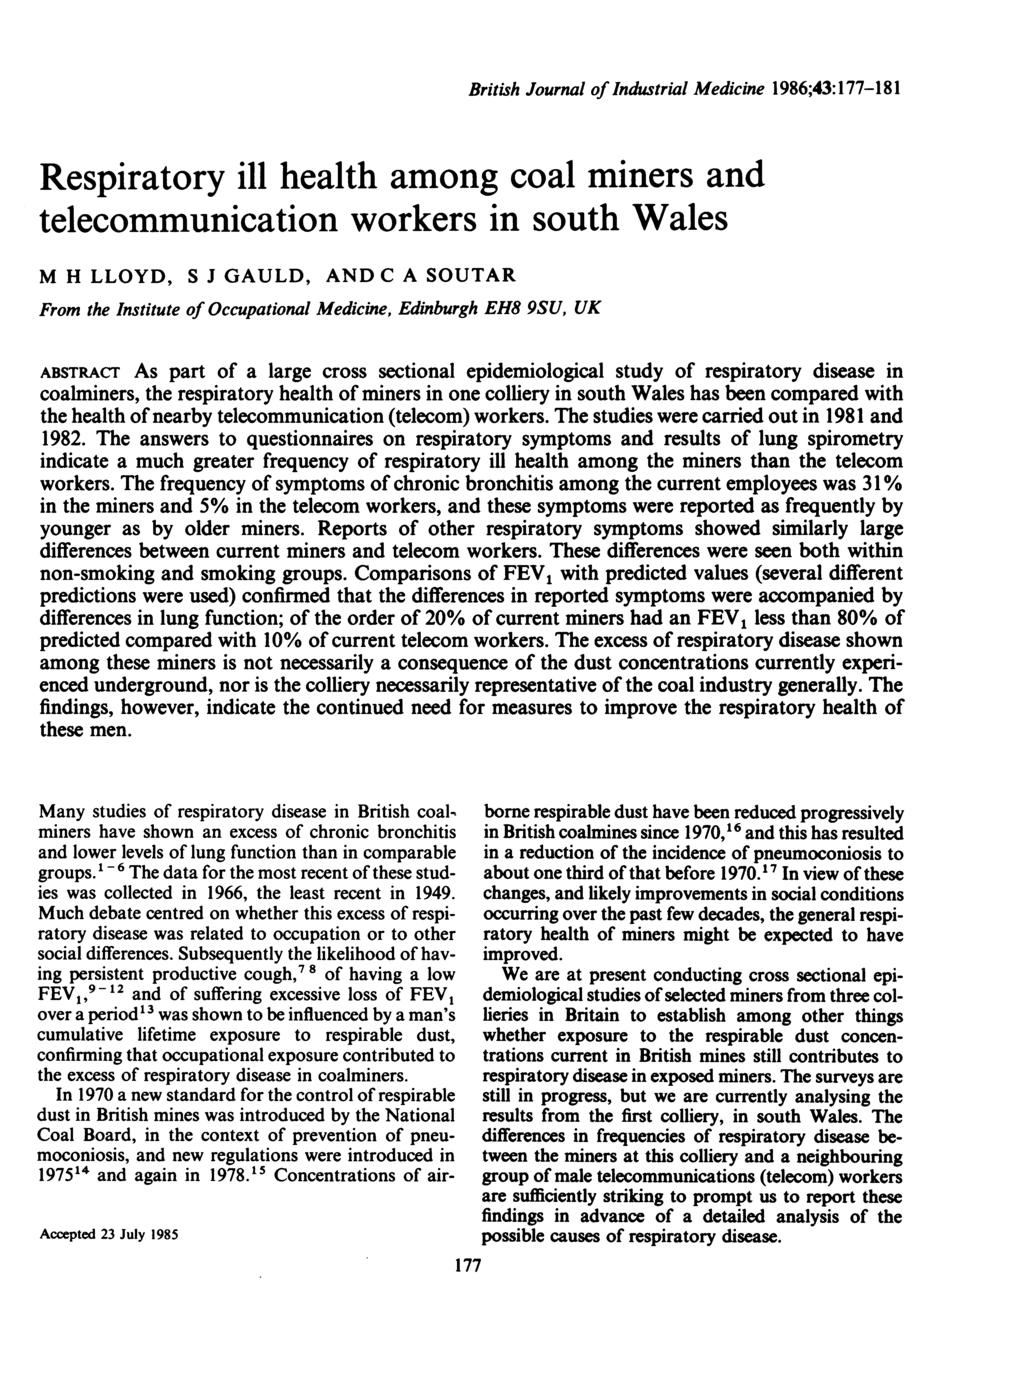 British Journal of Industrial Medicine 1986;43:177-181 Respiratory ill health among coal miners and telecommunication workers in south Wales M H LLOYD, S J GAULD, AND C A SOUTAR From the Institute of